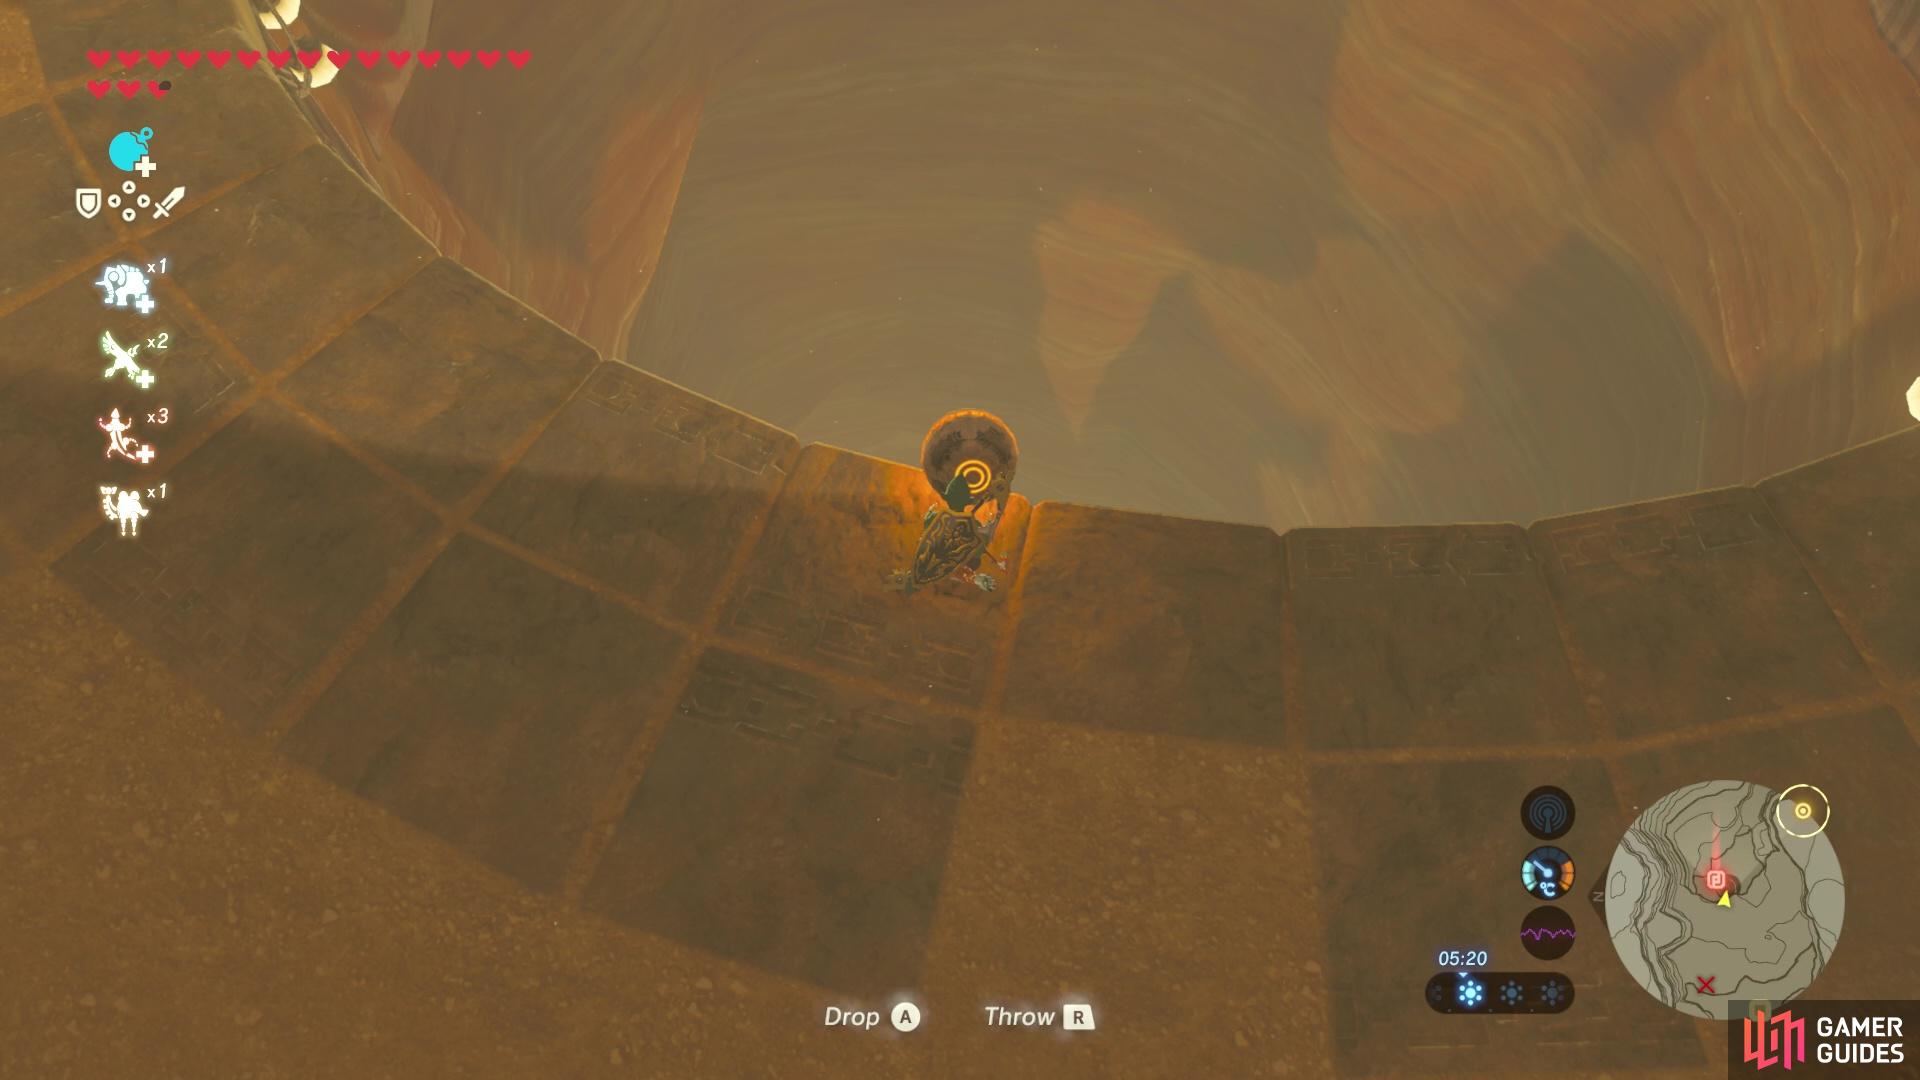 Drop the orb into the giant pit to spawn in the shrine!